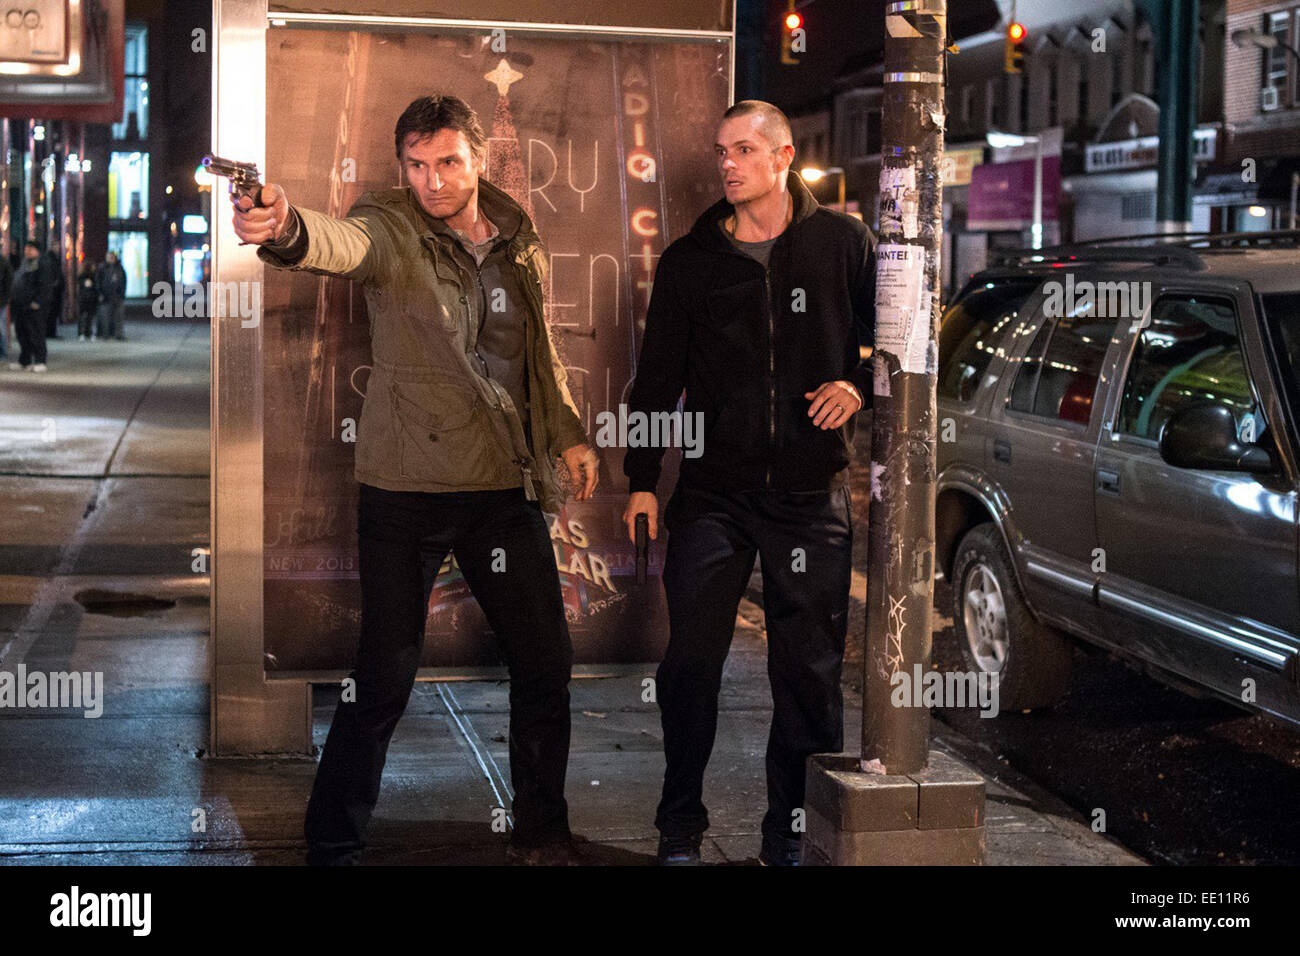 Run All Night is an upcoming film directed by Jaume Collet-Serra. The film stars Liam Neeson, Joel Kinnaman and Ed Harris. The film is scheduled to be released on April 17, 2015. Stock Photo